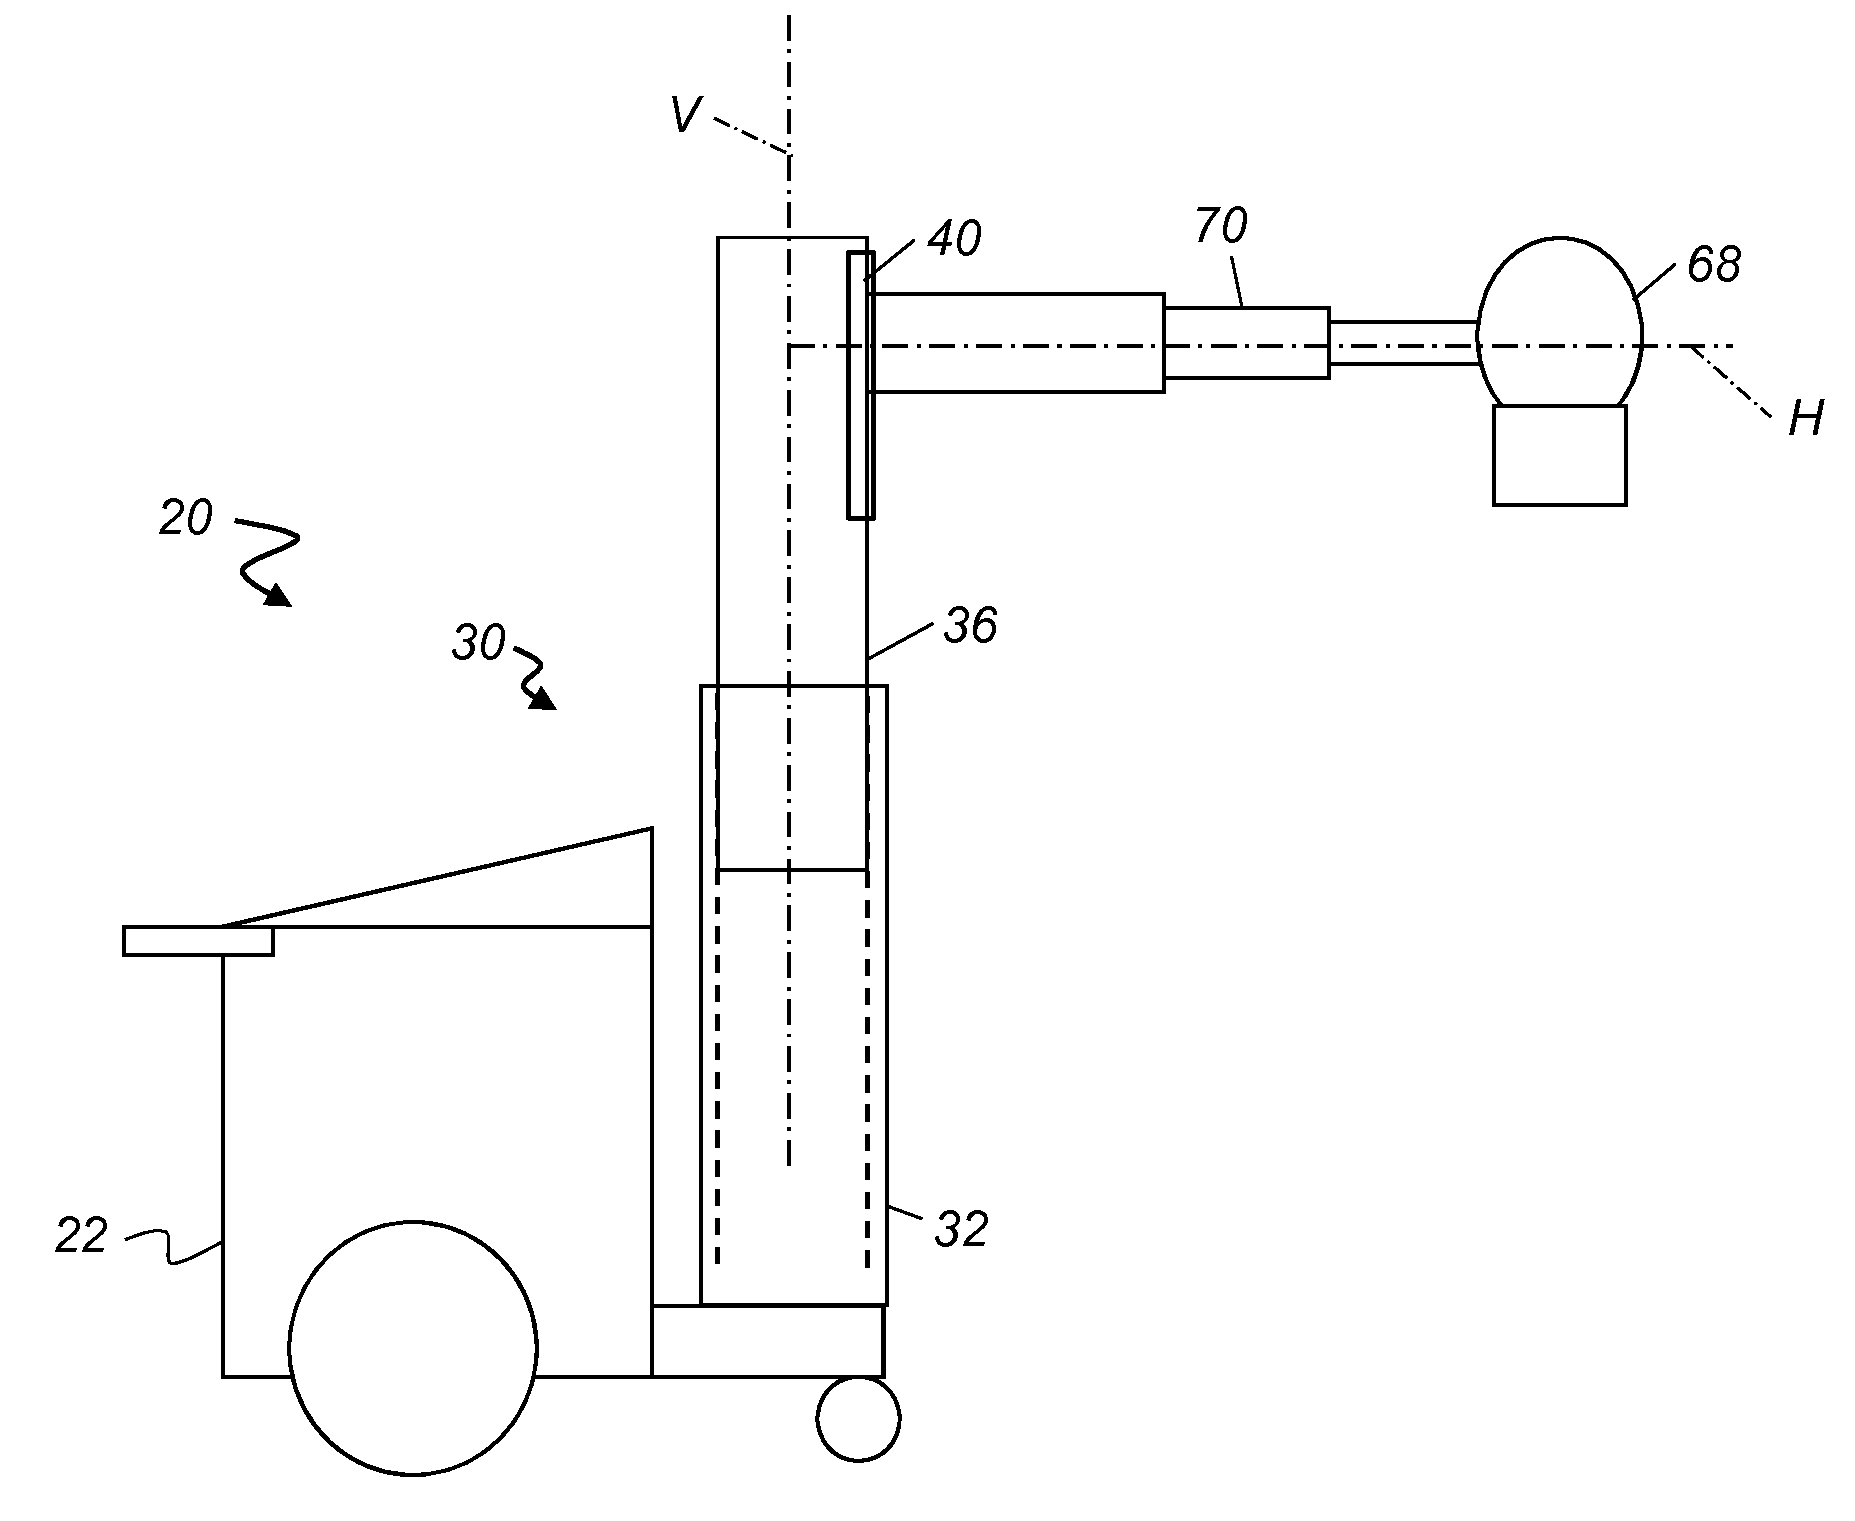 Collapsible column movement apparatus for mobile x-ray device